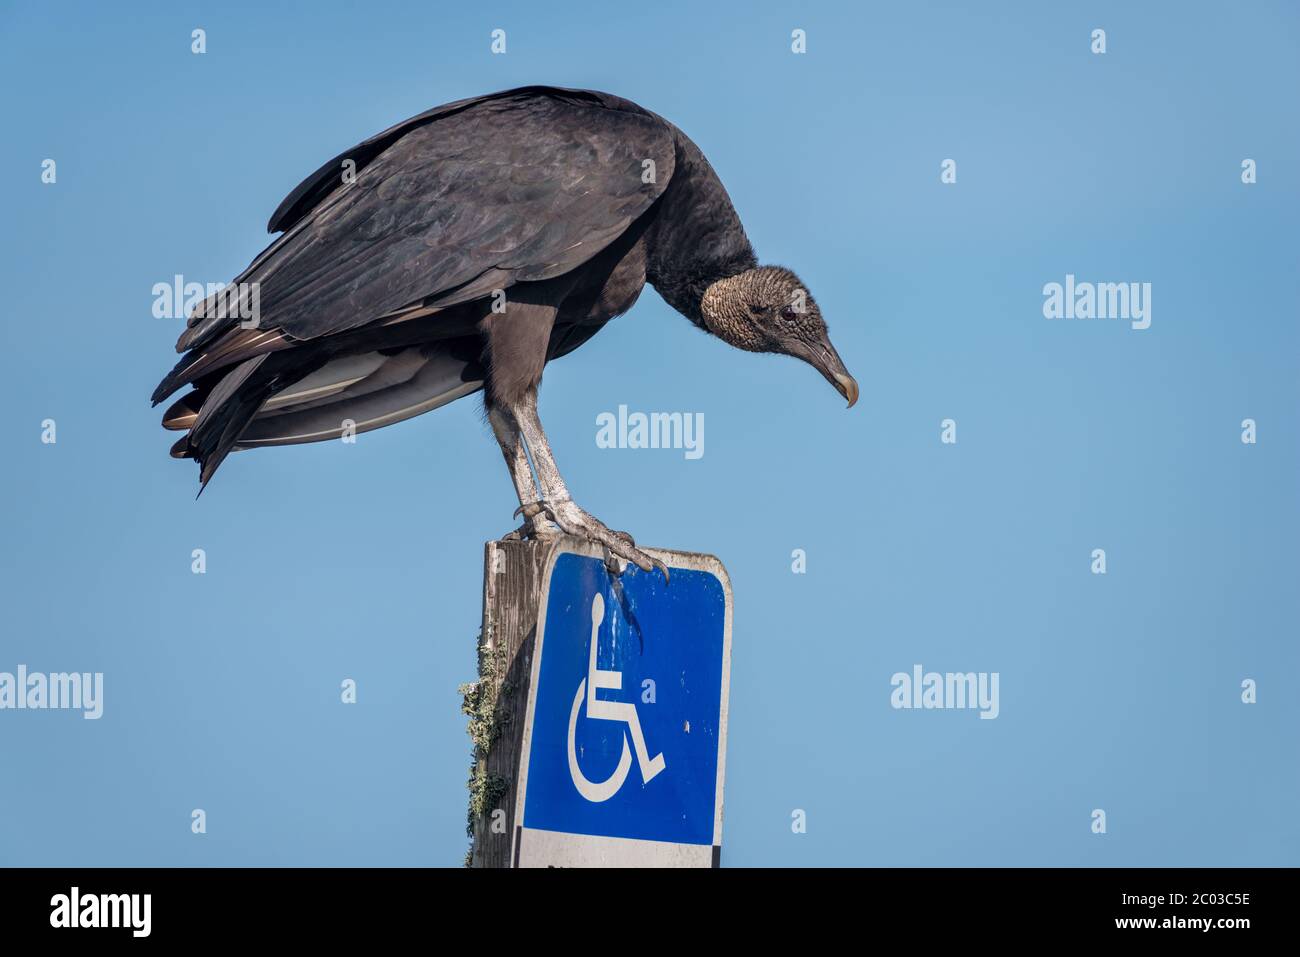 Portrait of an American Black Vulture perched on an handicap parking sign against the bright blue winter sky of northern Florida in February 2020 Stock Photo